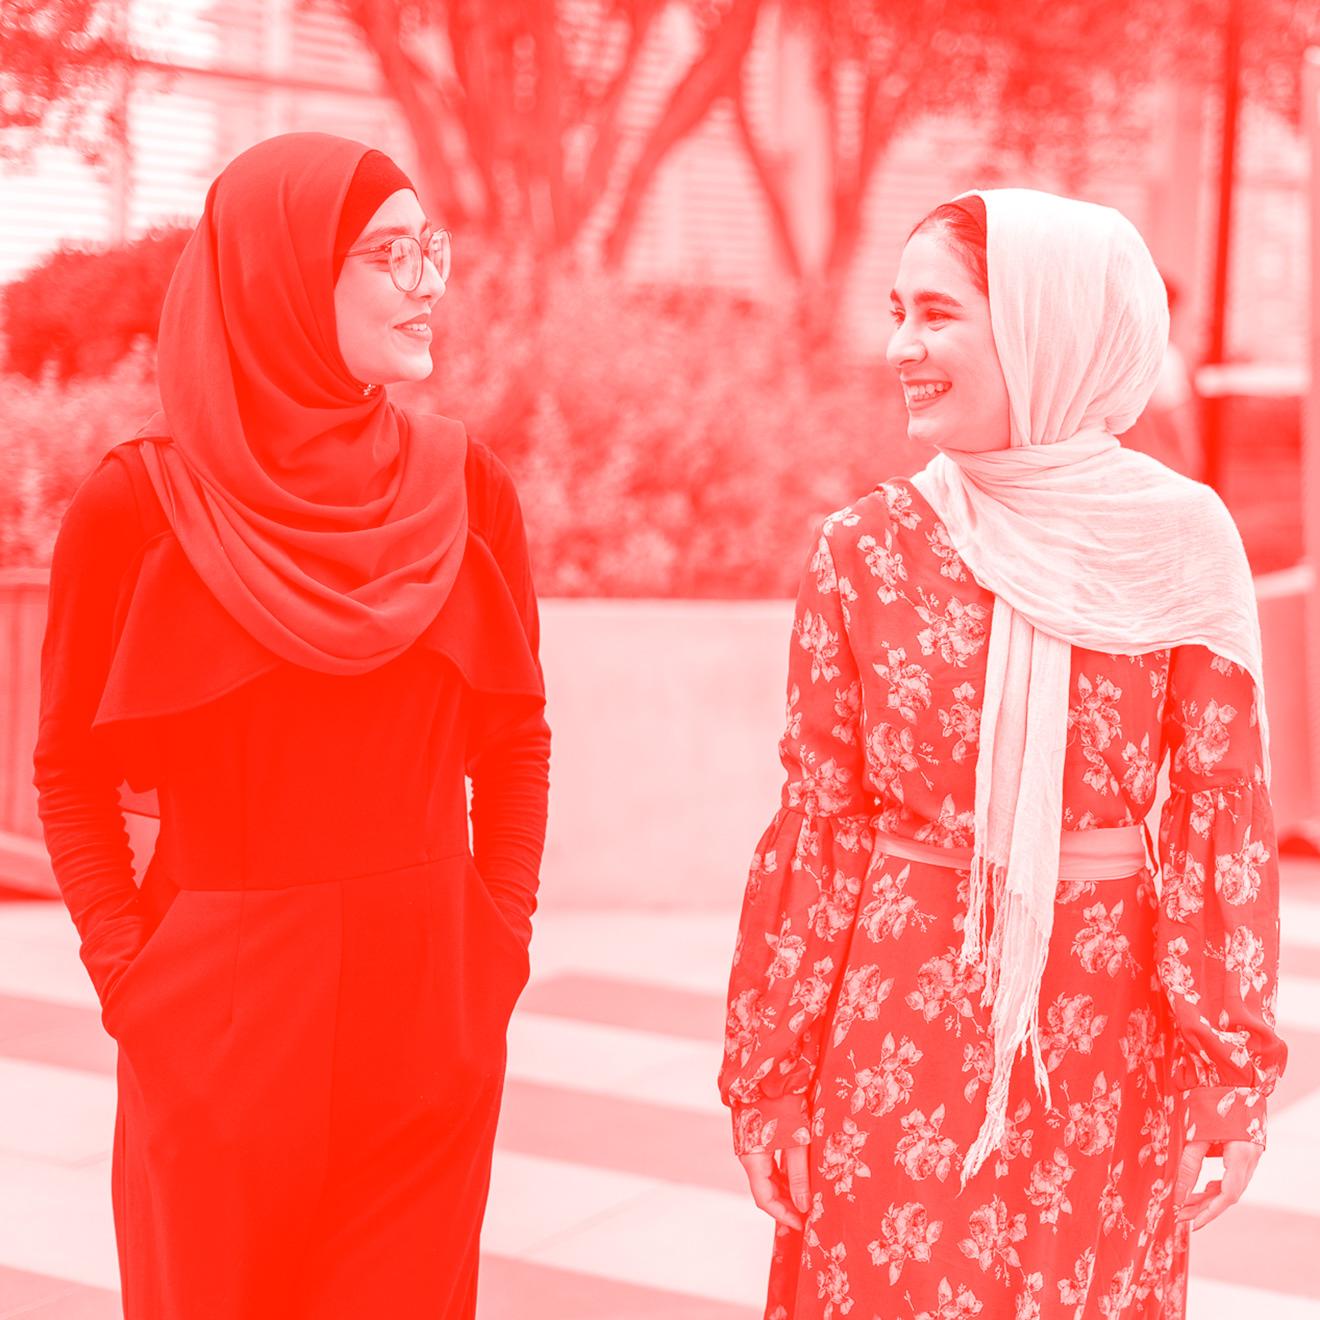 Two young women in hijabs smiling and walking.